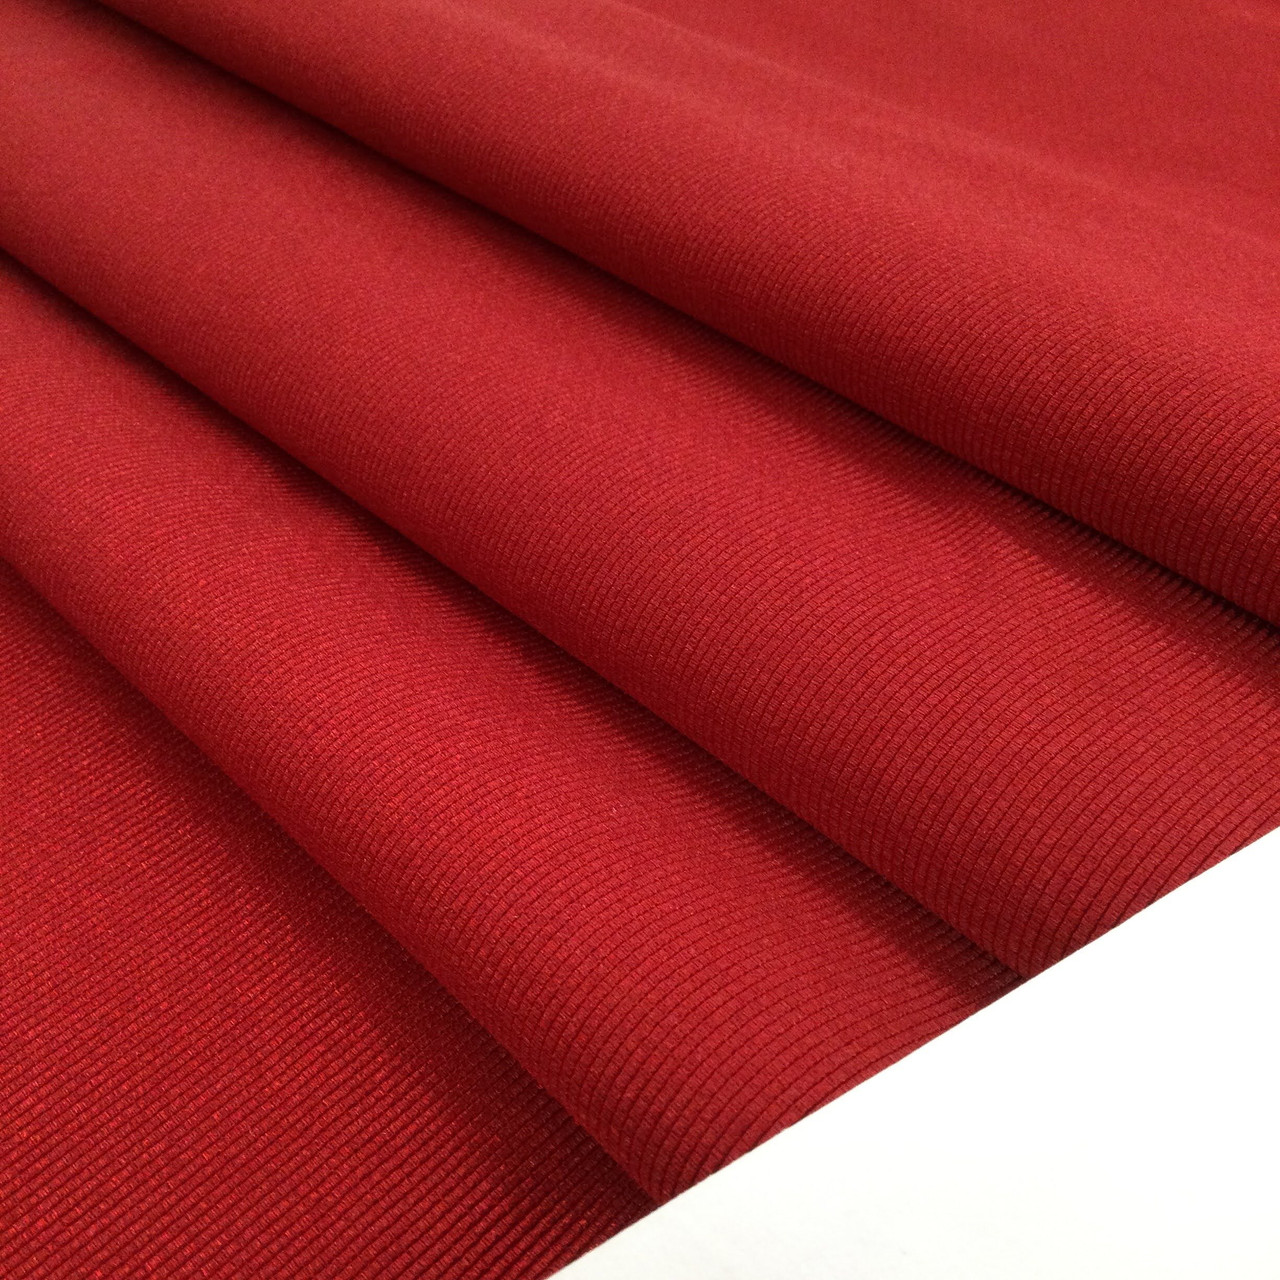 Cherry Red Microfiber Fabric, Medium Weight Upholstery, 54 Wide, By the  Yard